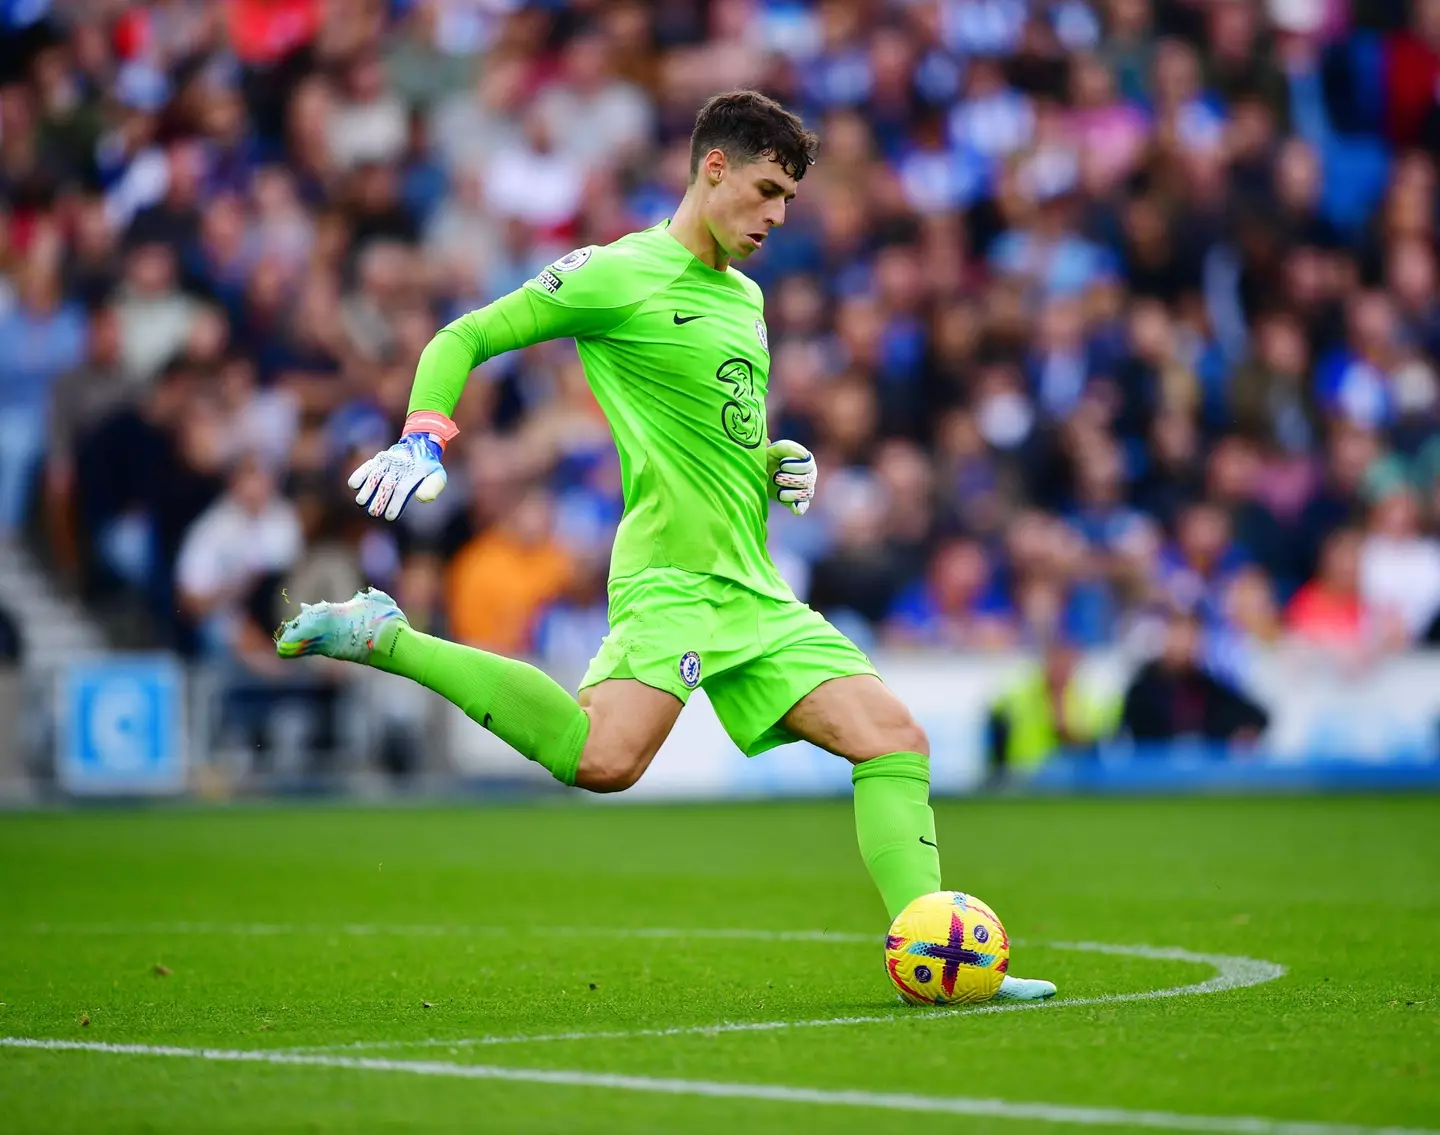 Kepa Arrizabalaga during the Premier League match between Brighton & Hove Albion and Chelsea. (Alamy)